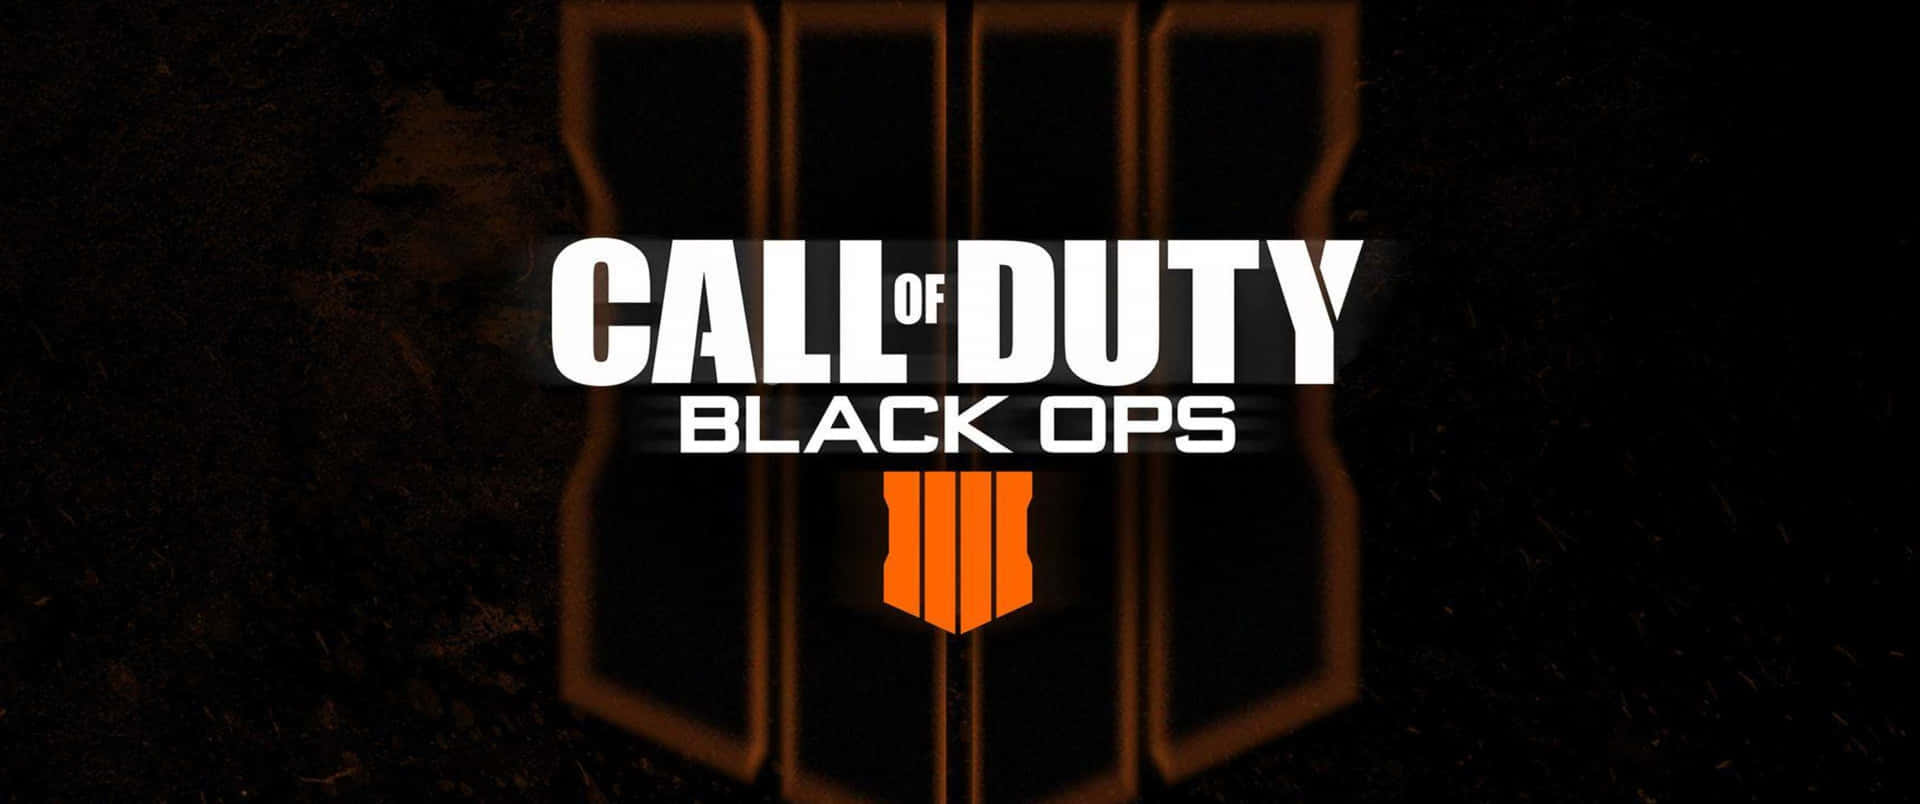 Call of Duty Black Ops 4: Get Ready For the Ultimate Battle